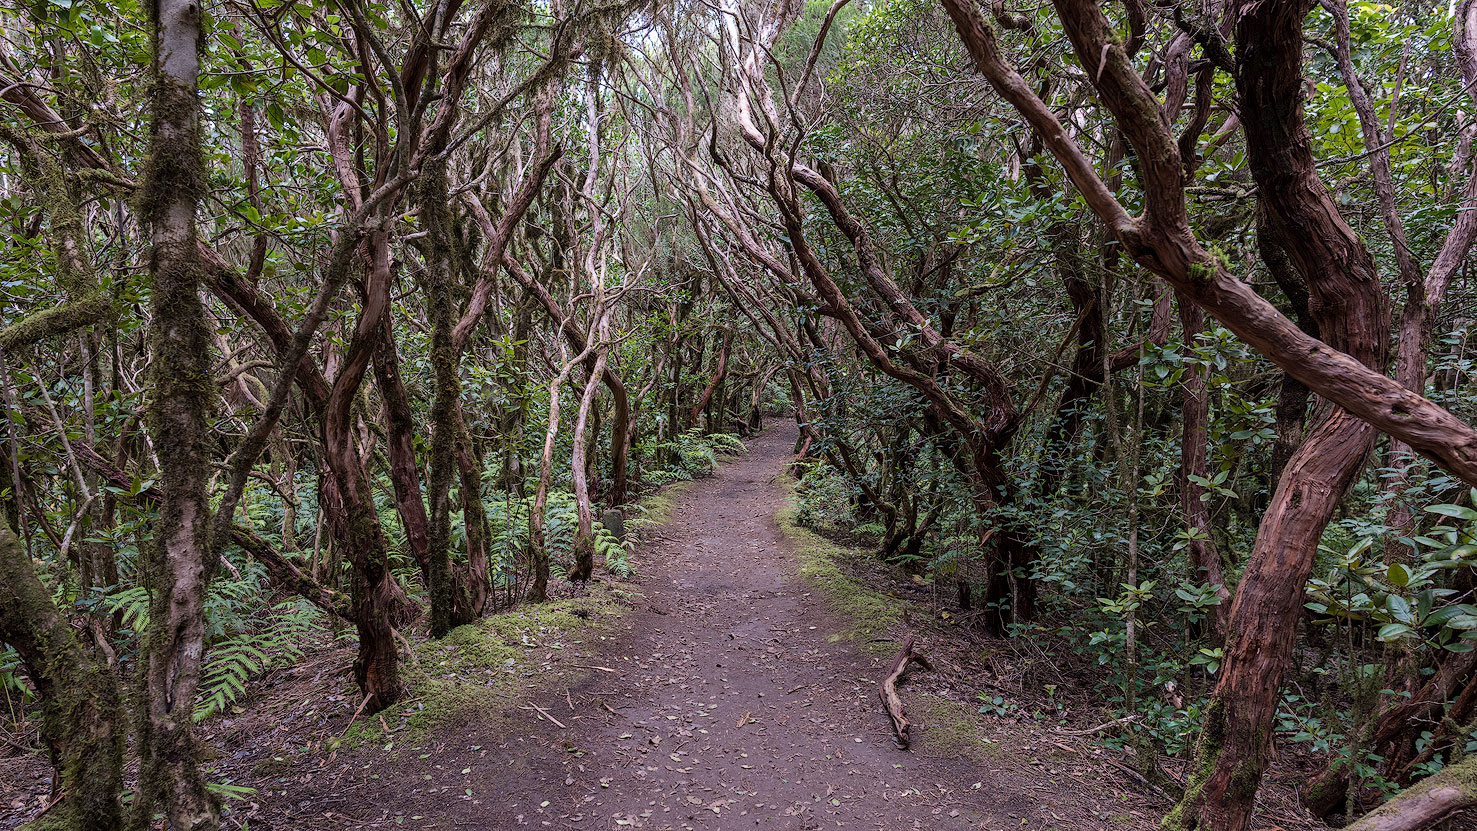 Laurel forest in the Anaga Mountains